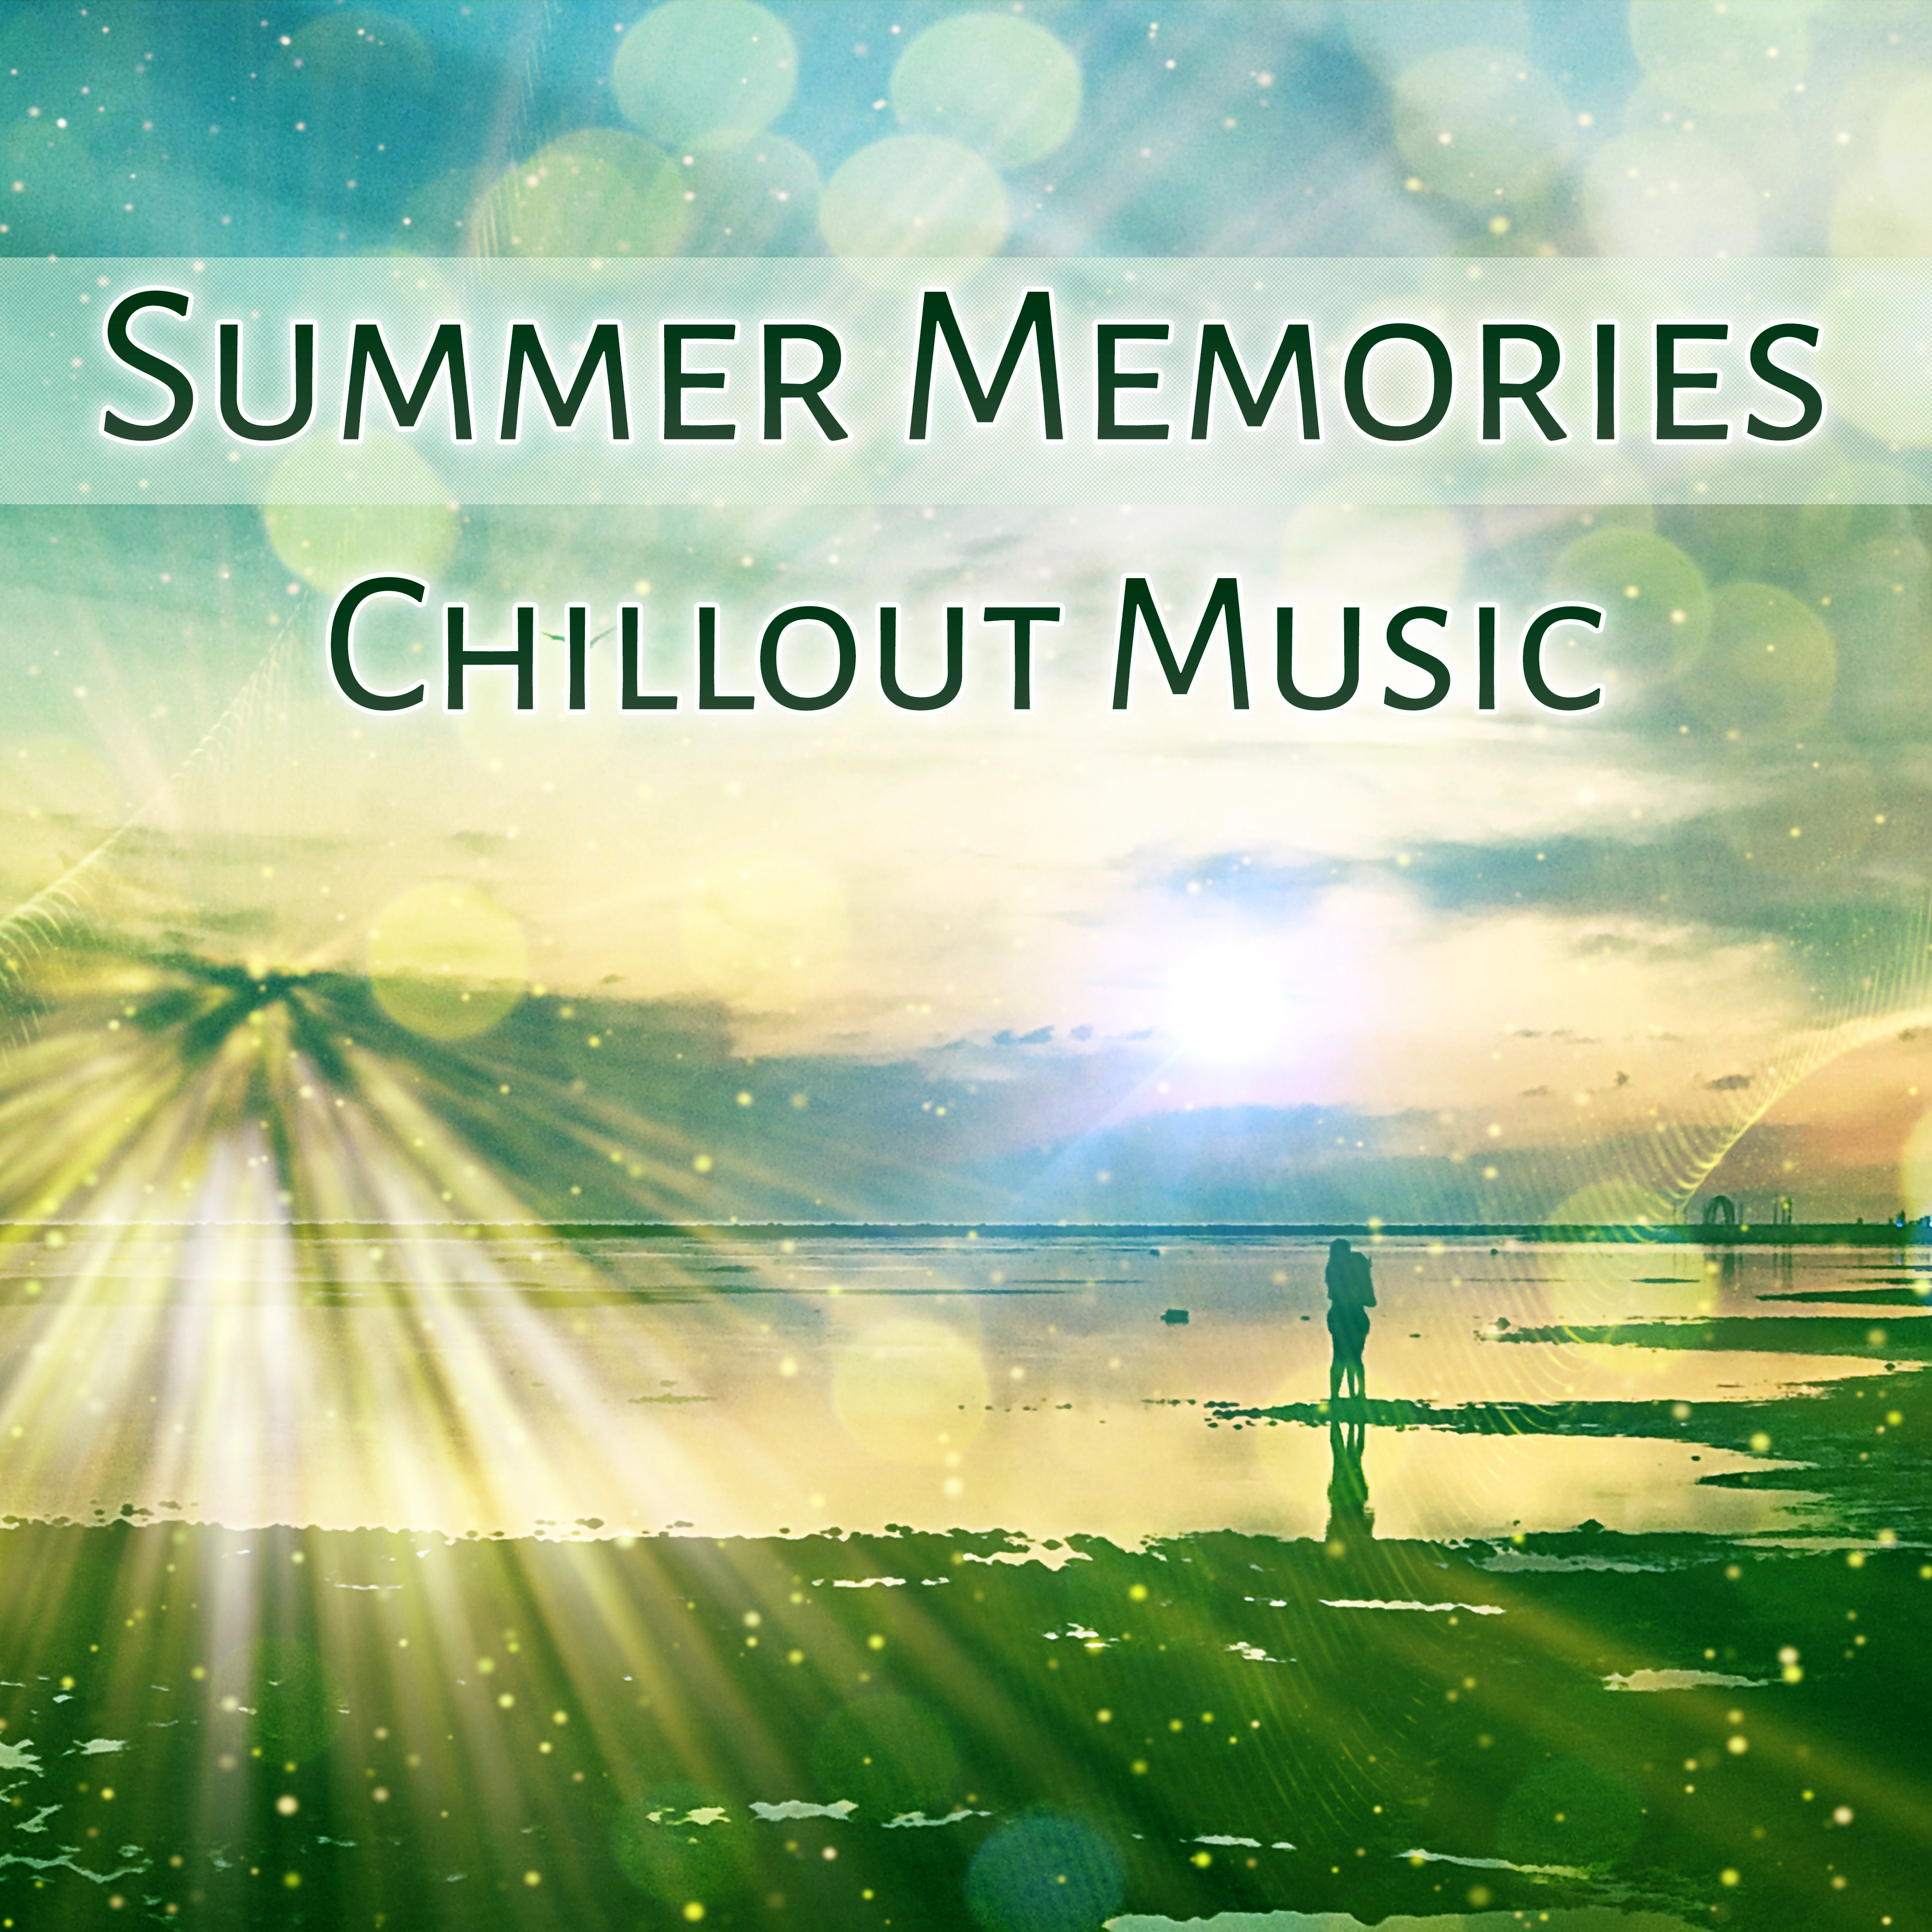 Summer Memories Chillout Music – Deep Chillout, Relax & Chill,  Pure Electronic Sounds